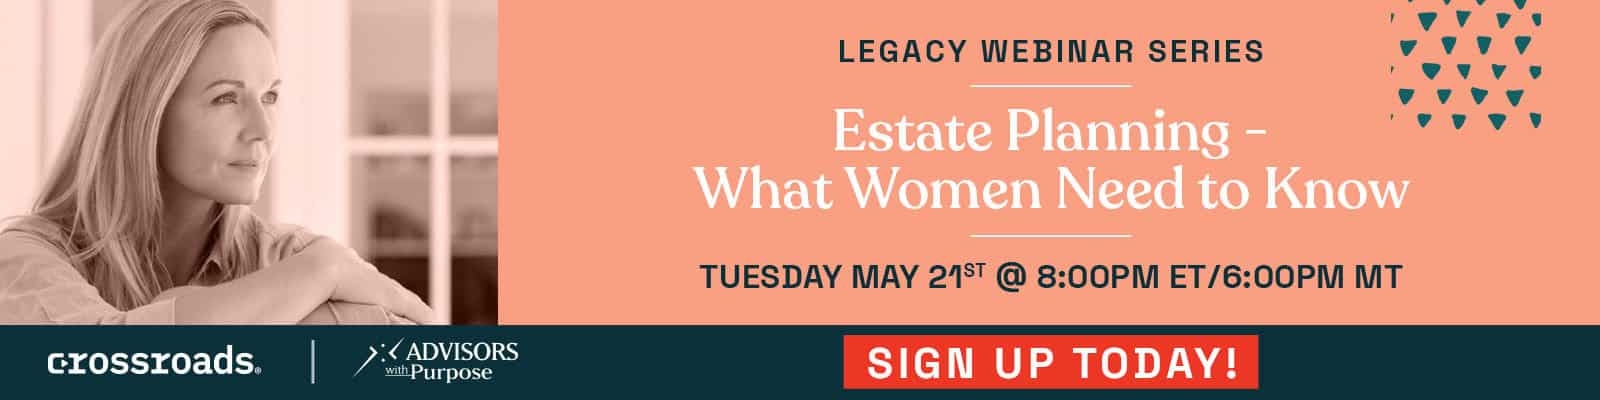 Estate Planning - What Women Need to Know